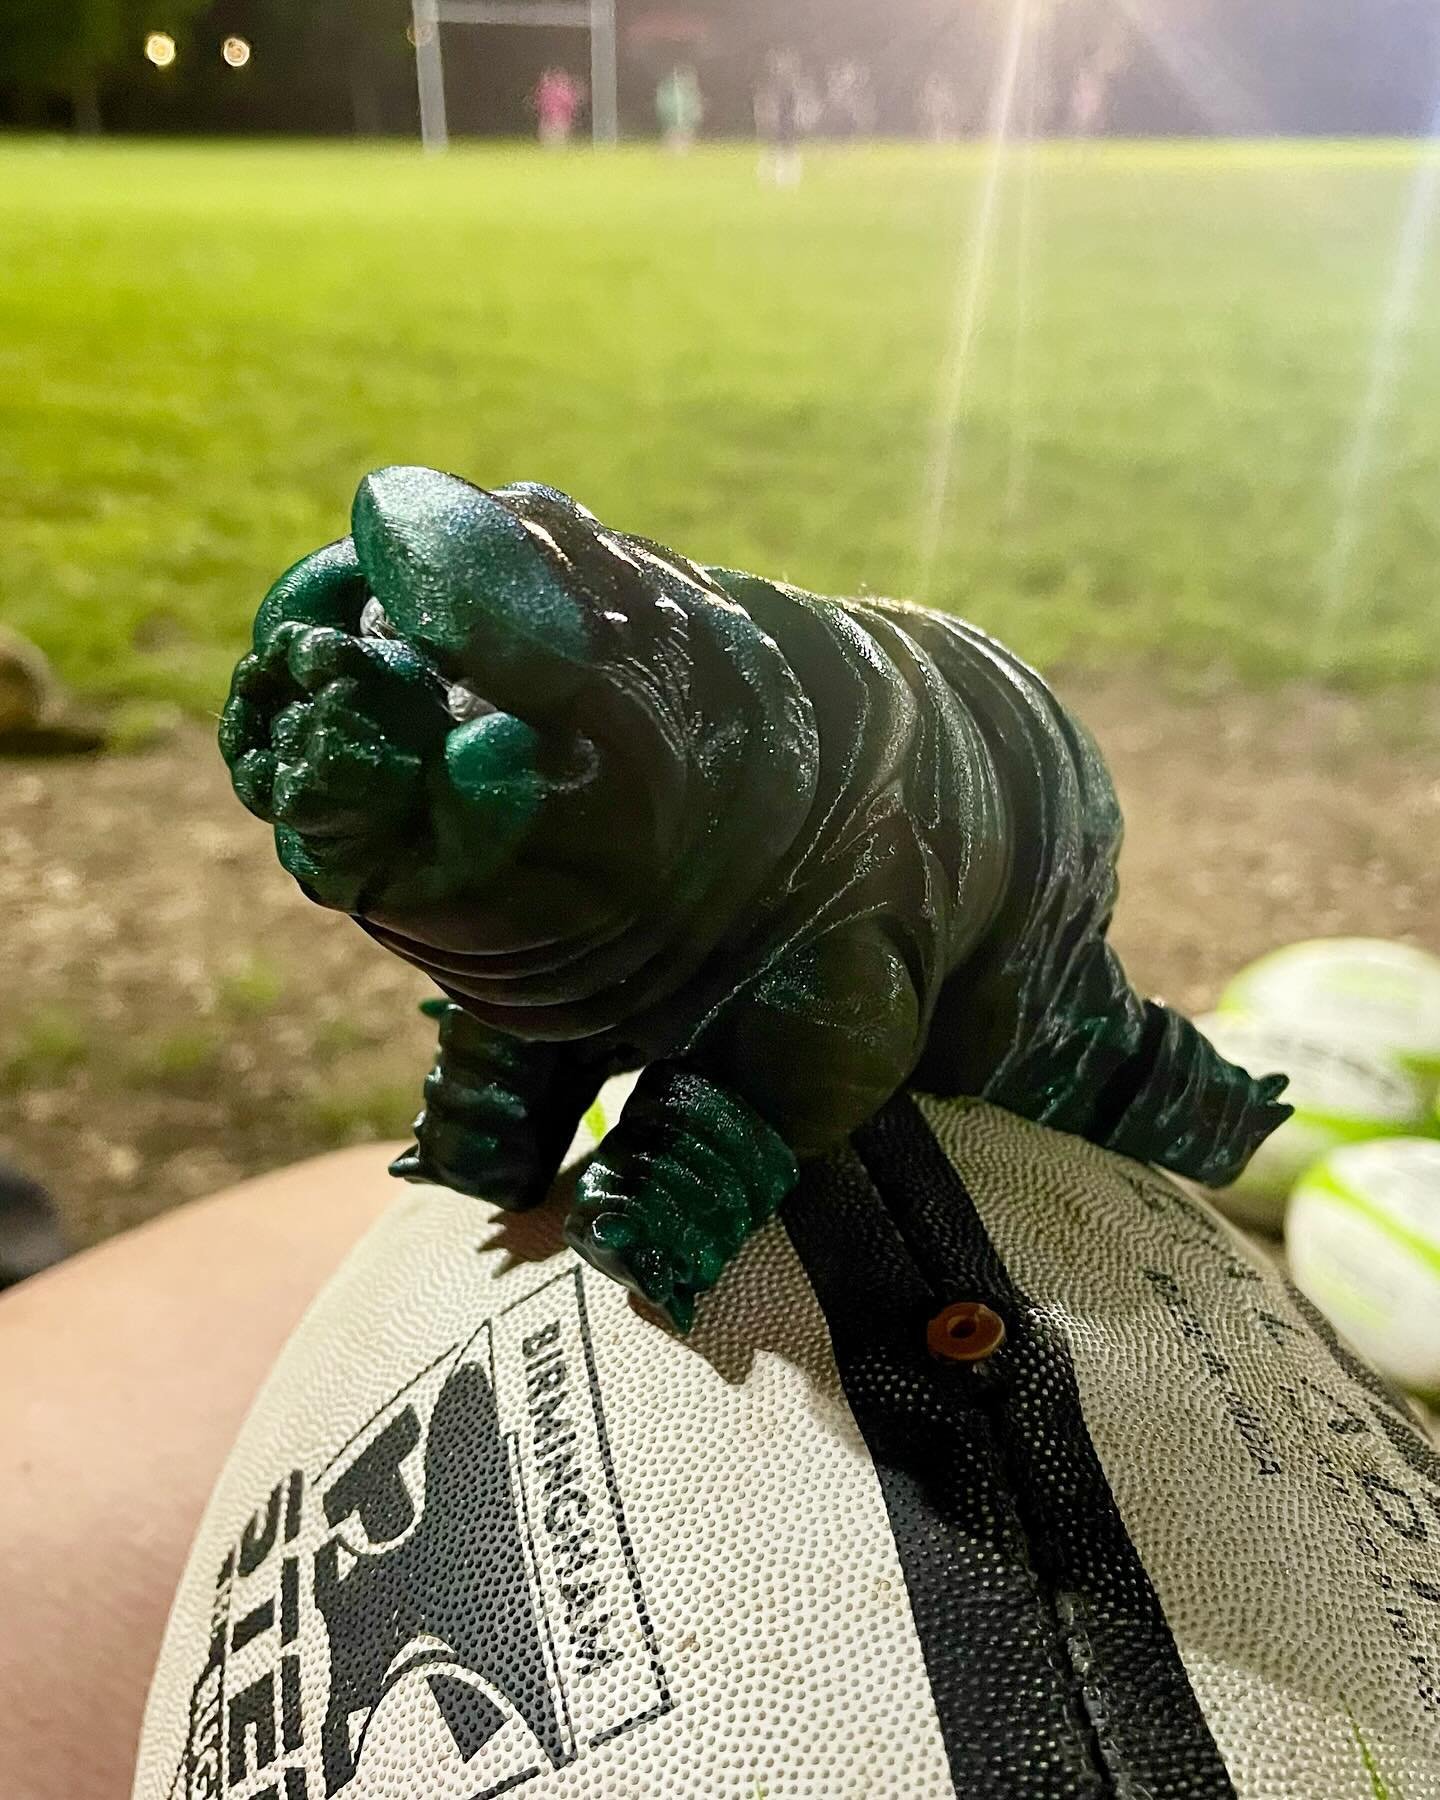 And you all thought it was an April Fool&rsquo;s Joke. Our new mascot. Taking name suggestions&hellip; 

#tardigrade #waterbear #steelrugby